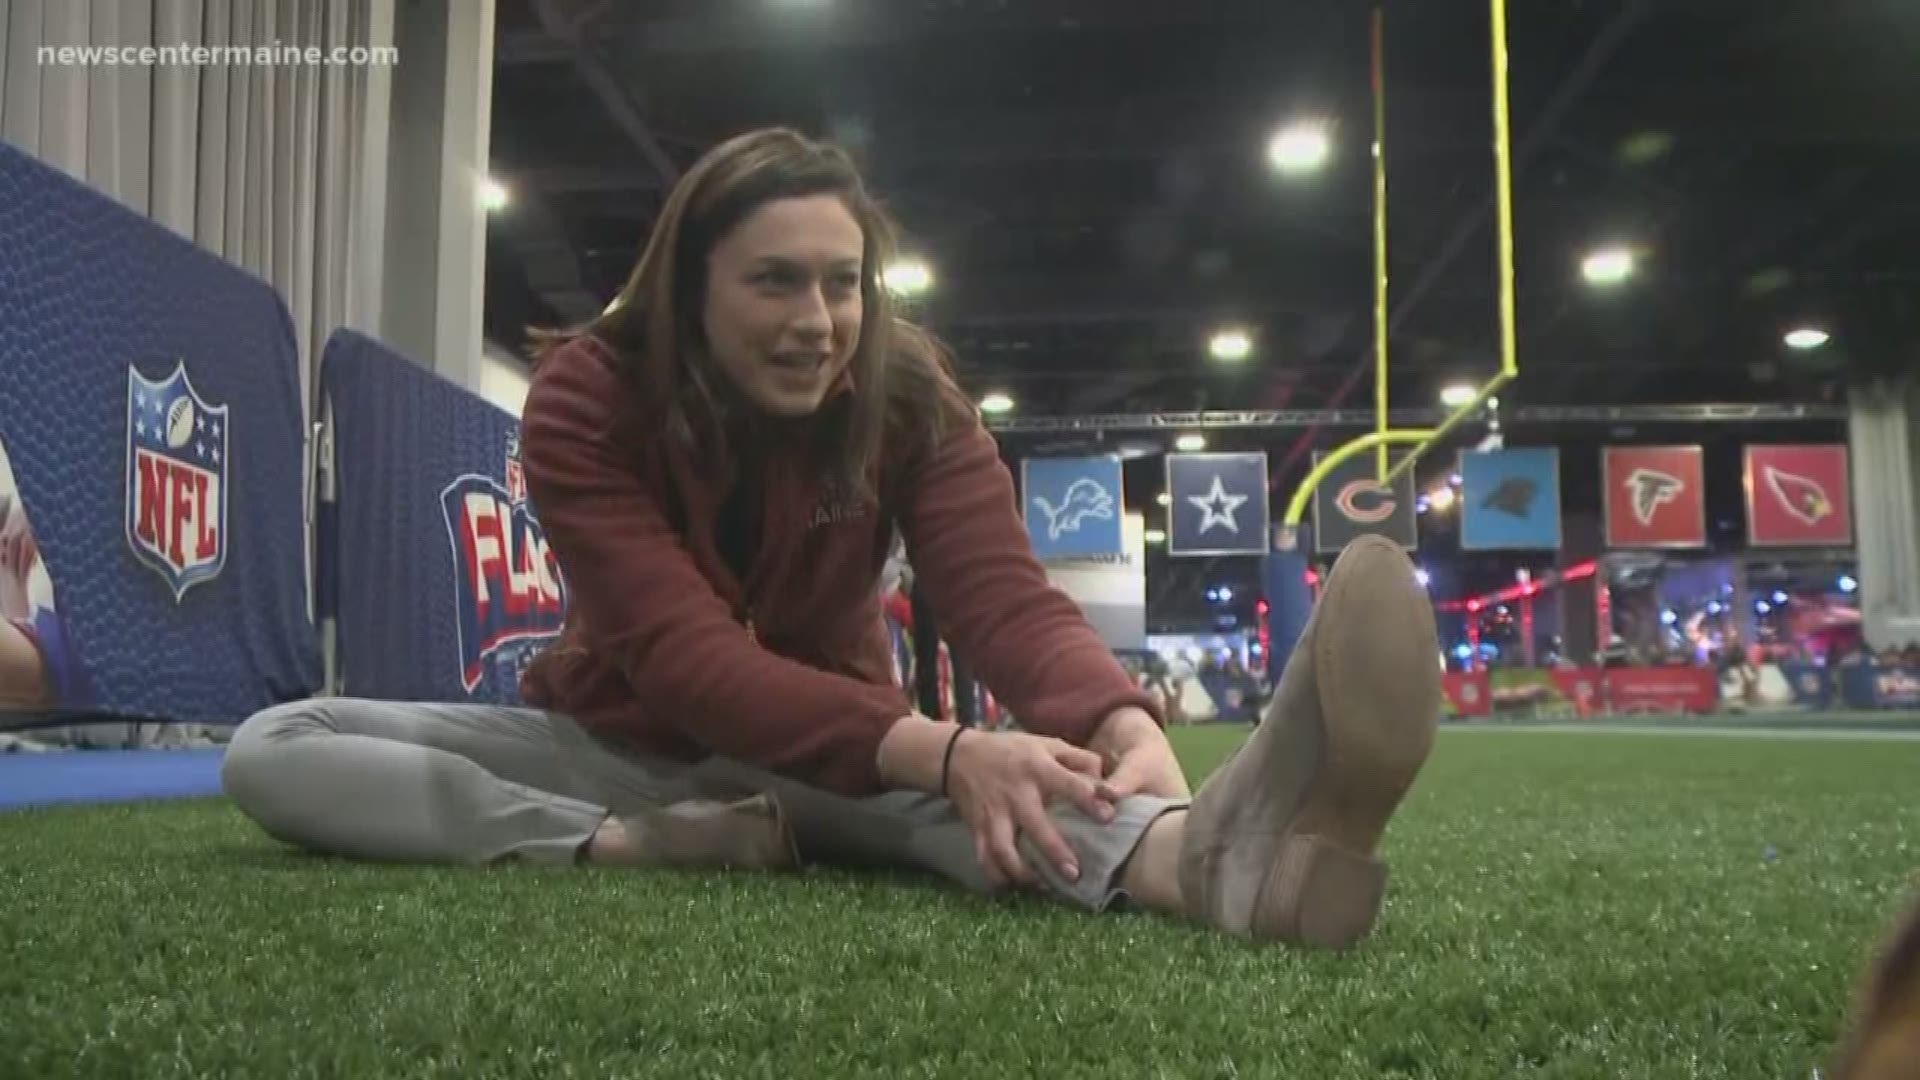 Jess Gagne and Chris Costa have a not-so-friendly competition at the Super Bowl Experience.